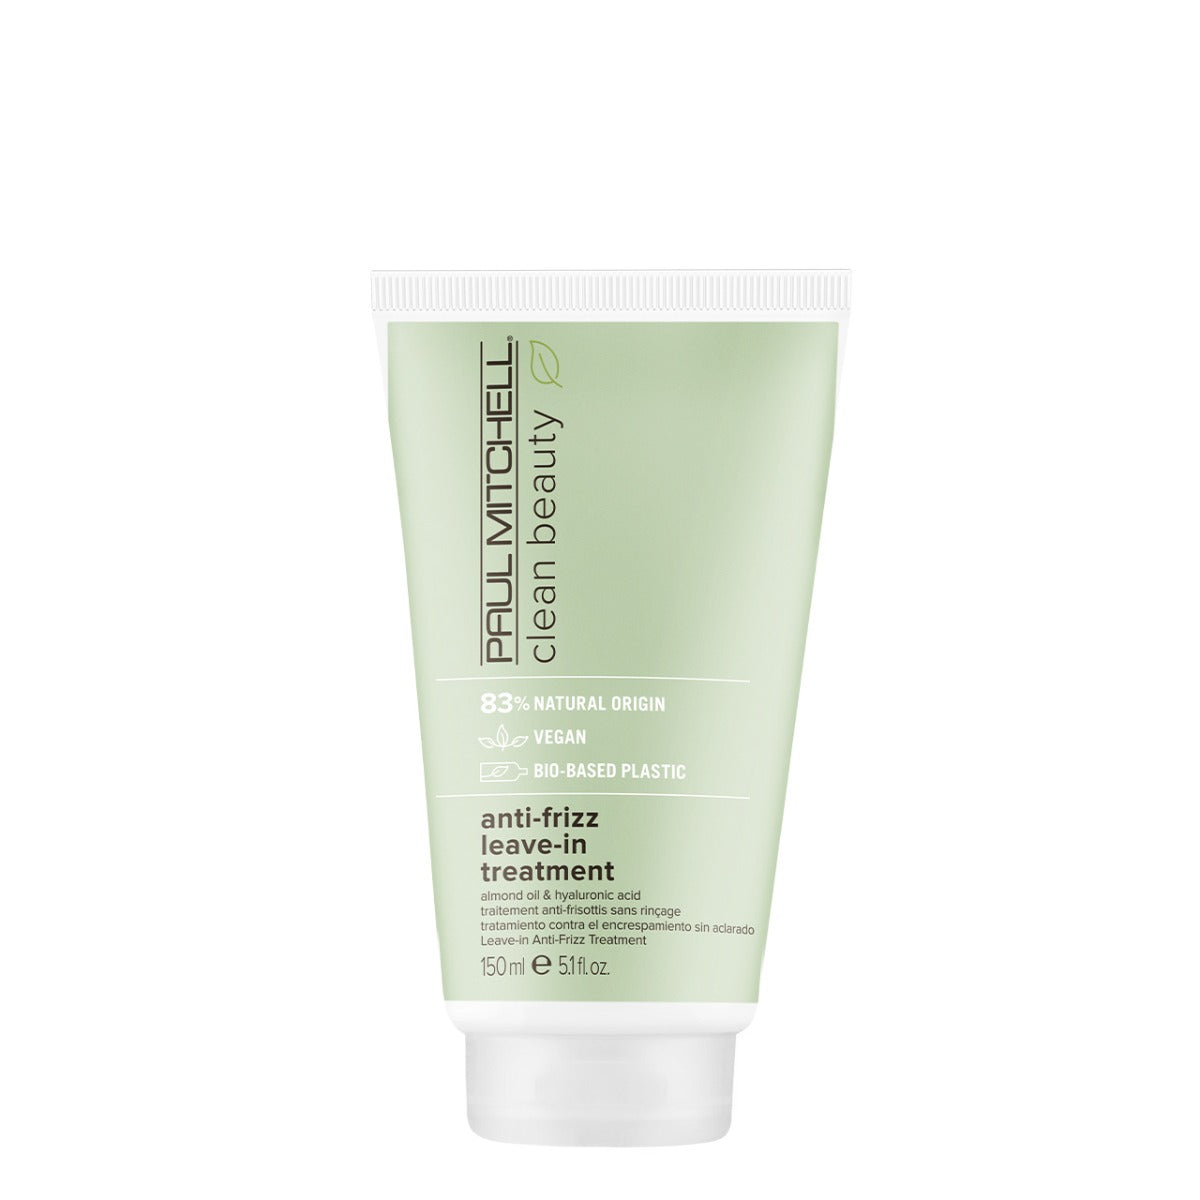 Clean Beauty Anti-Frizz Leave-In Treatment - by Paul Mitchell |ProCare Outlet|